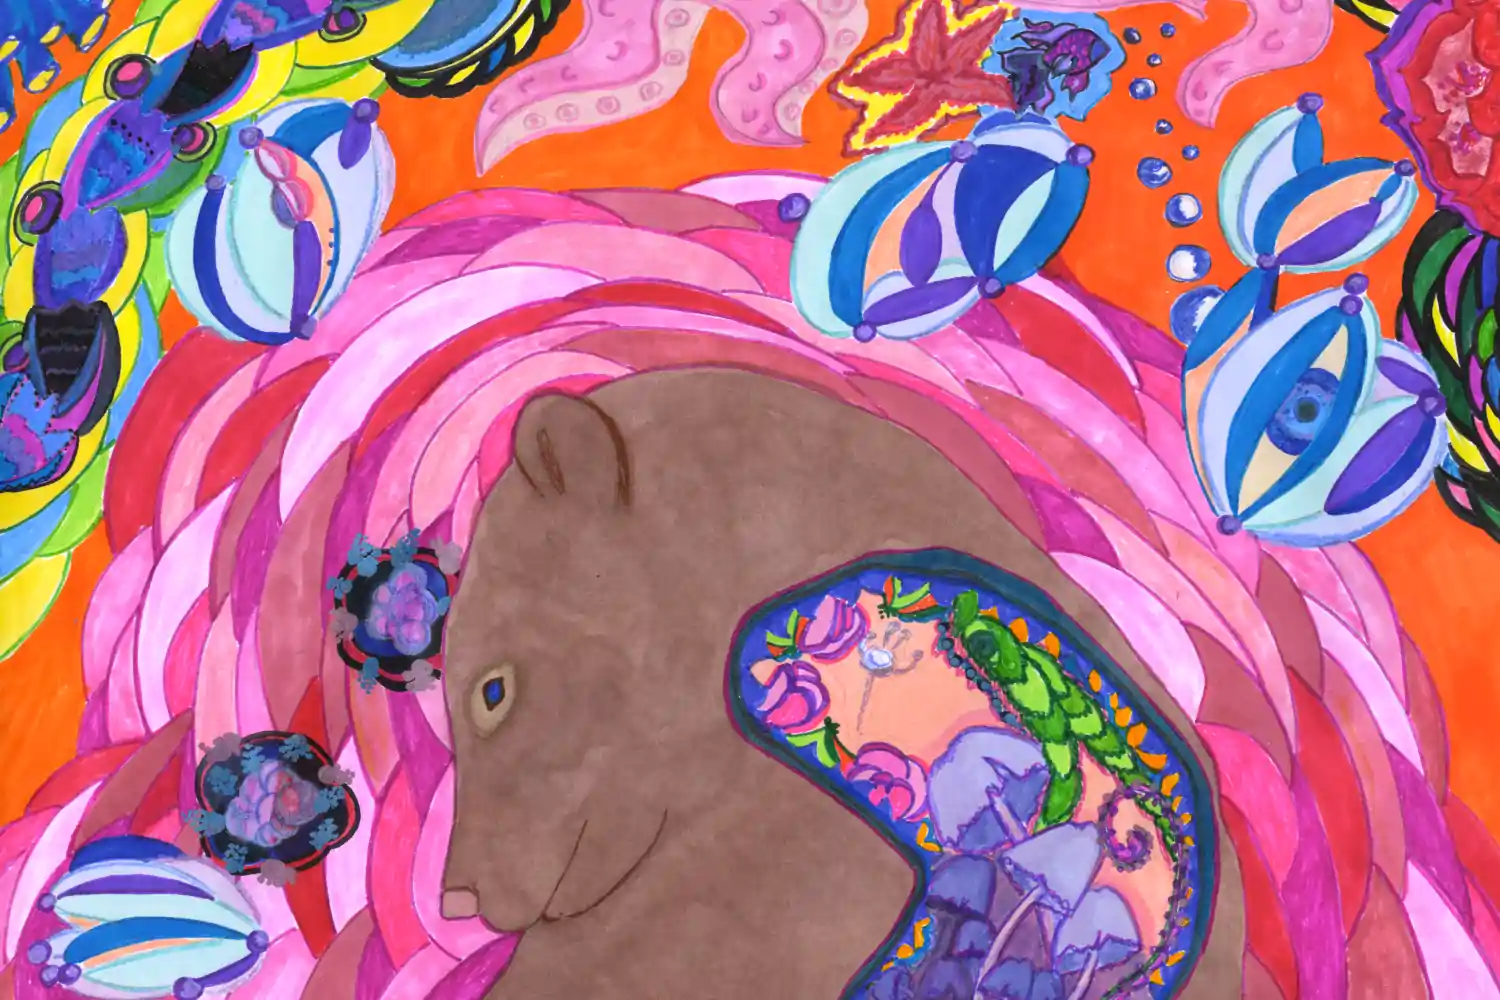 Psychedelic trippy drawing of a bear high on shrooms